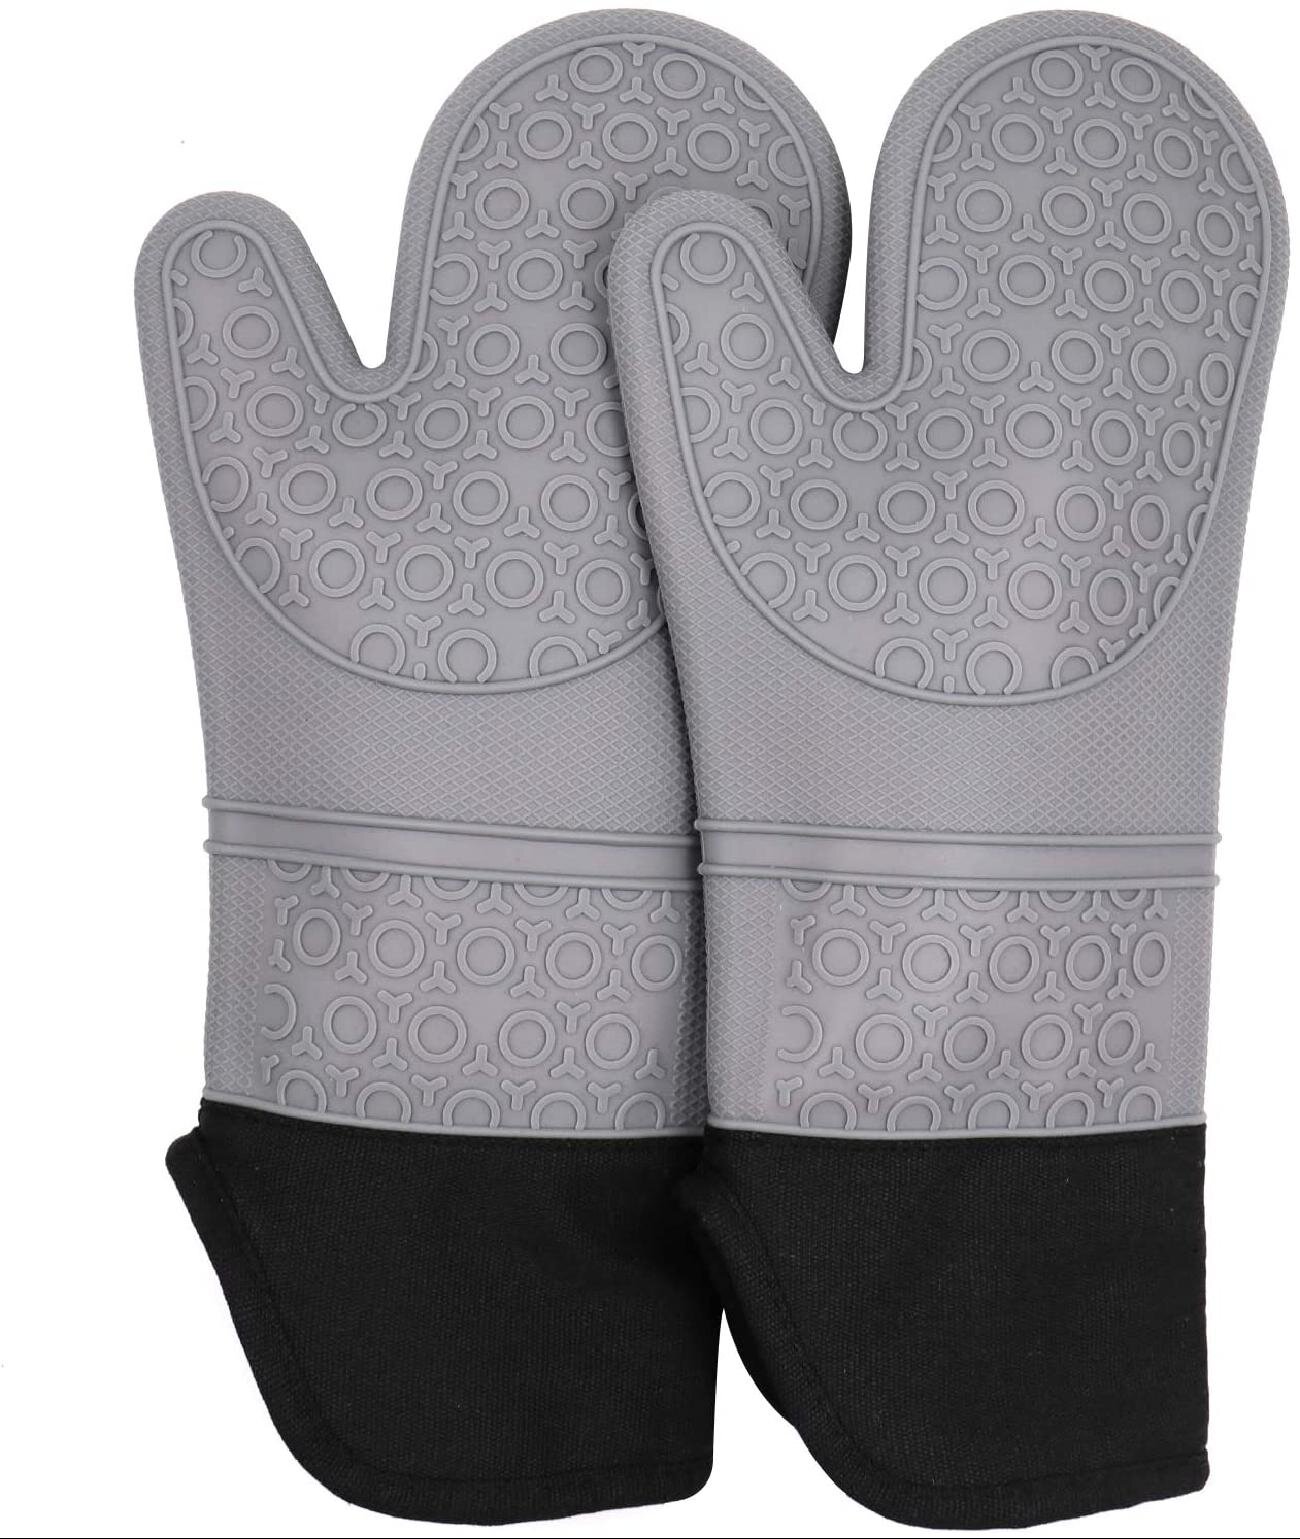 Oven Mitts 1 Pair of Quilted Cotton Lining Heat Resistant Kitchen Gloves